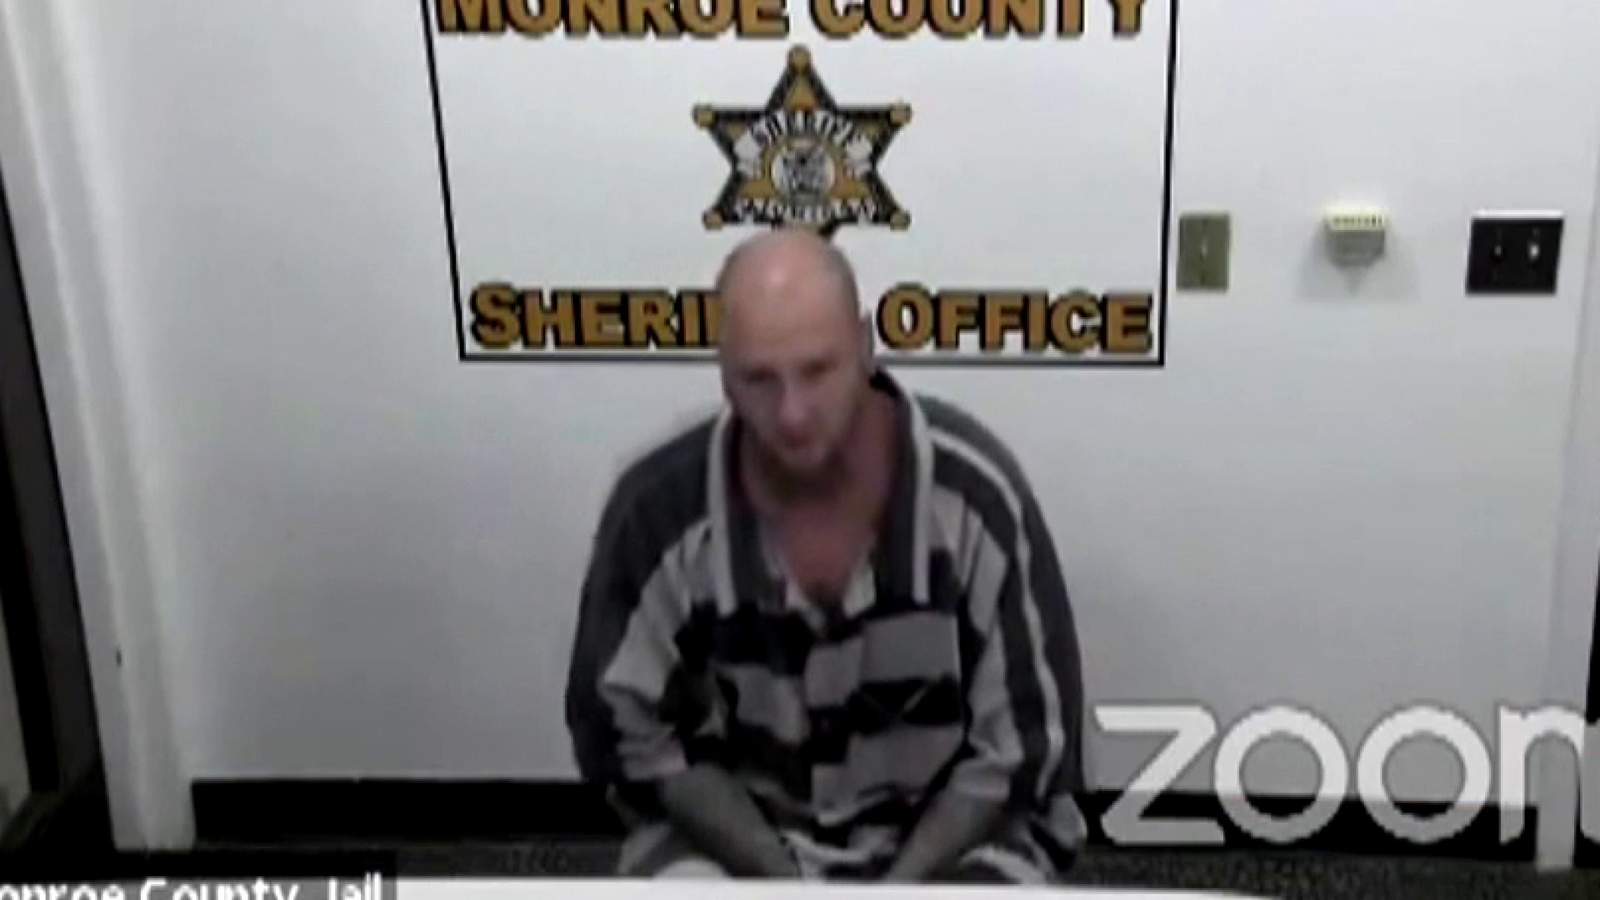 Monroe County man appears in court after alleged racially motivated attack on teenager